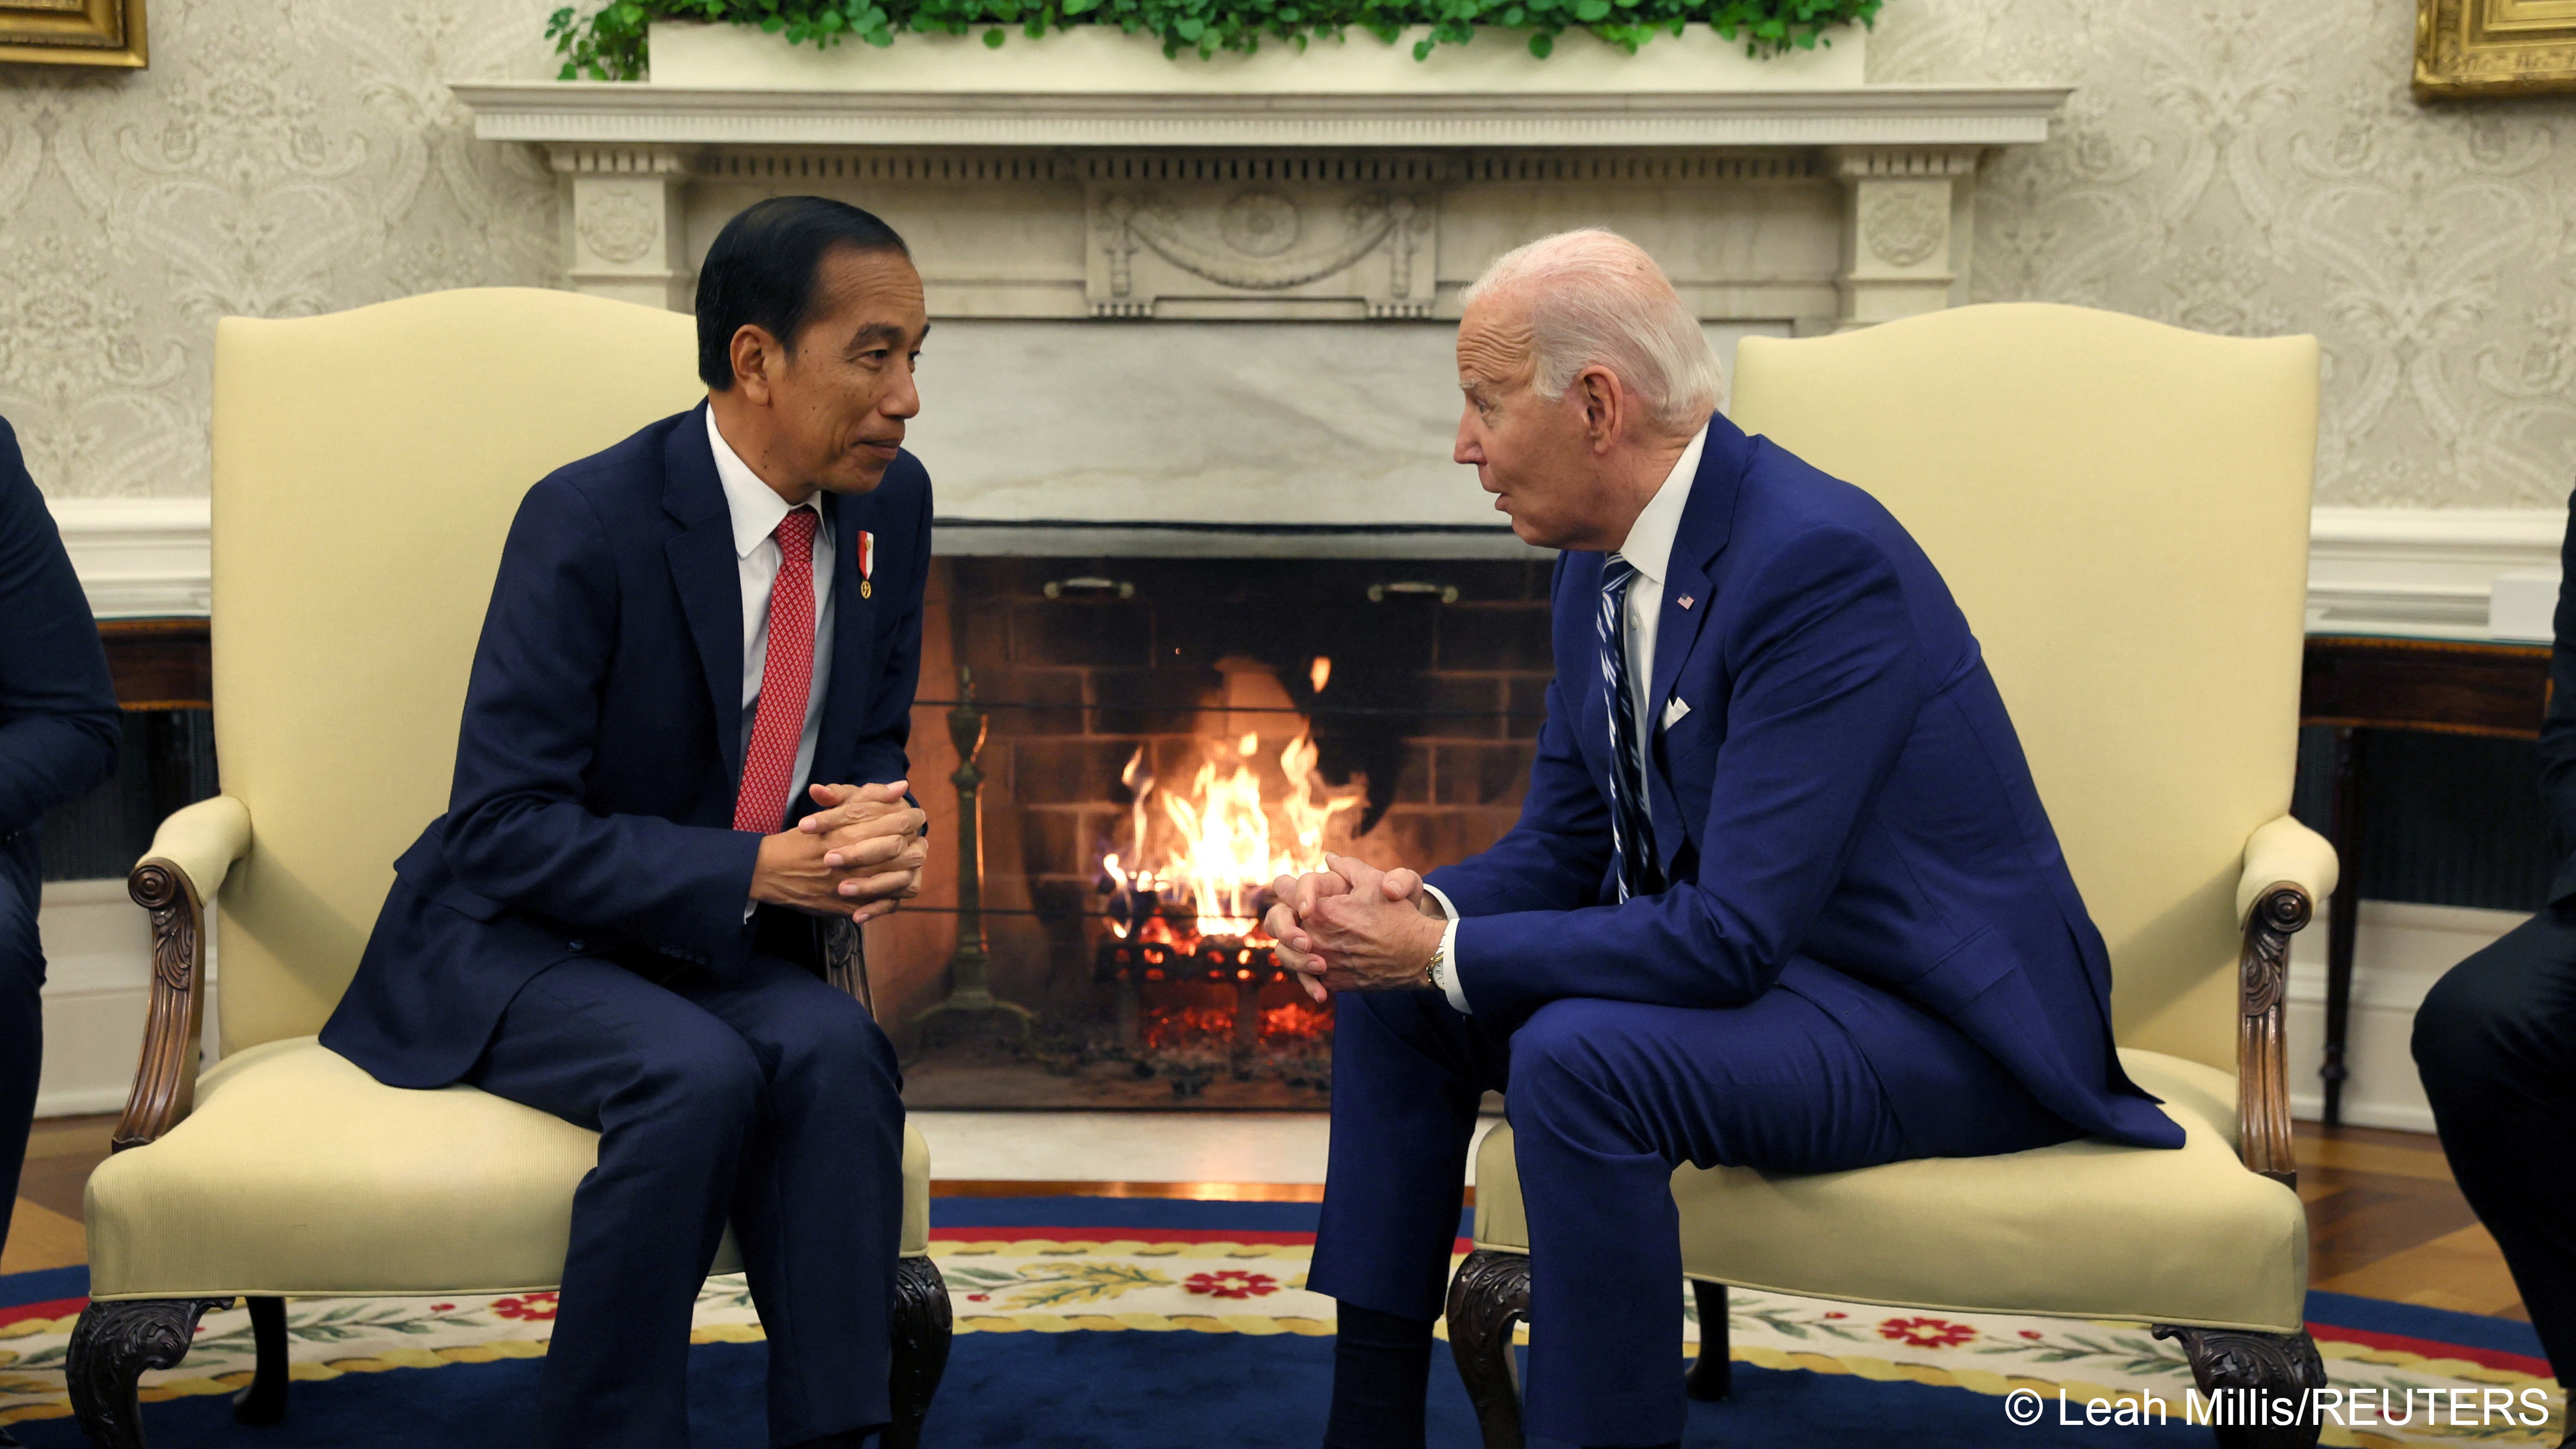 Indonesian President Joko Widodo and U.S. President Joe Biden sit in armchairs either side of a fireplace in the White House